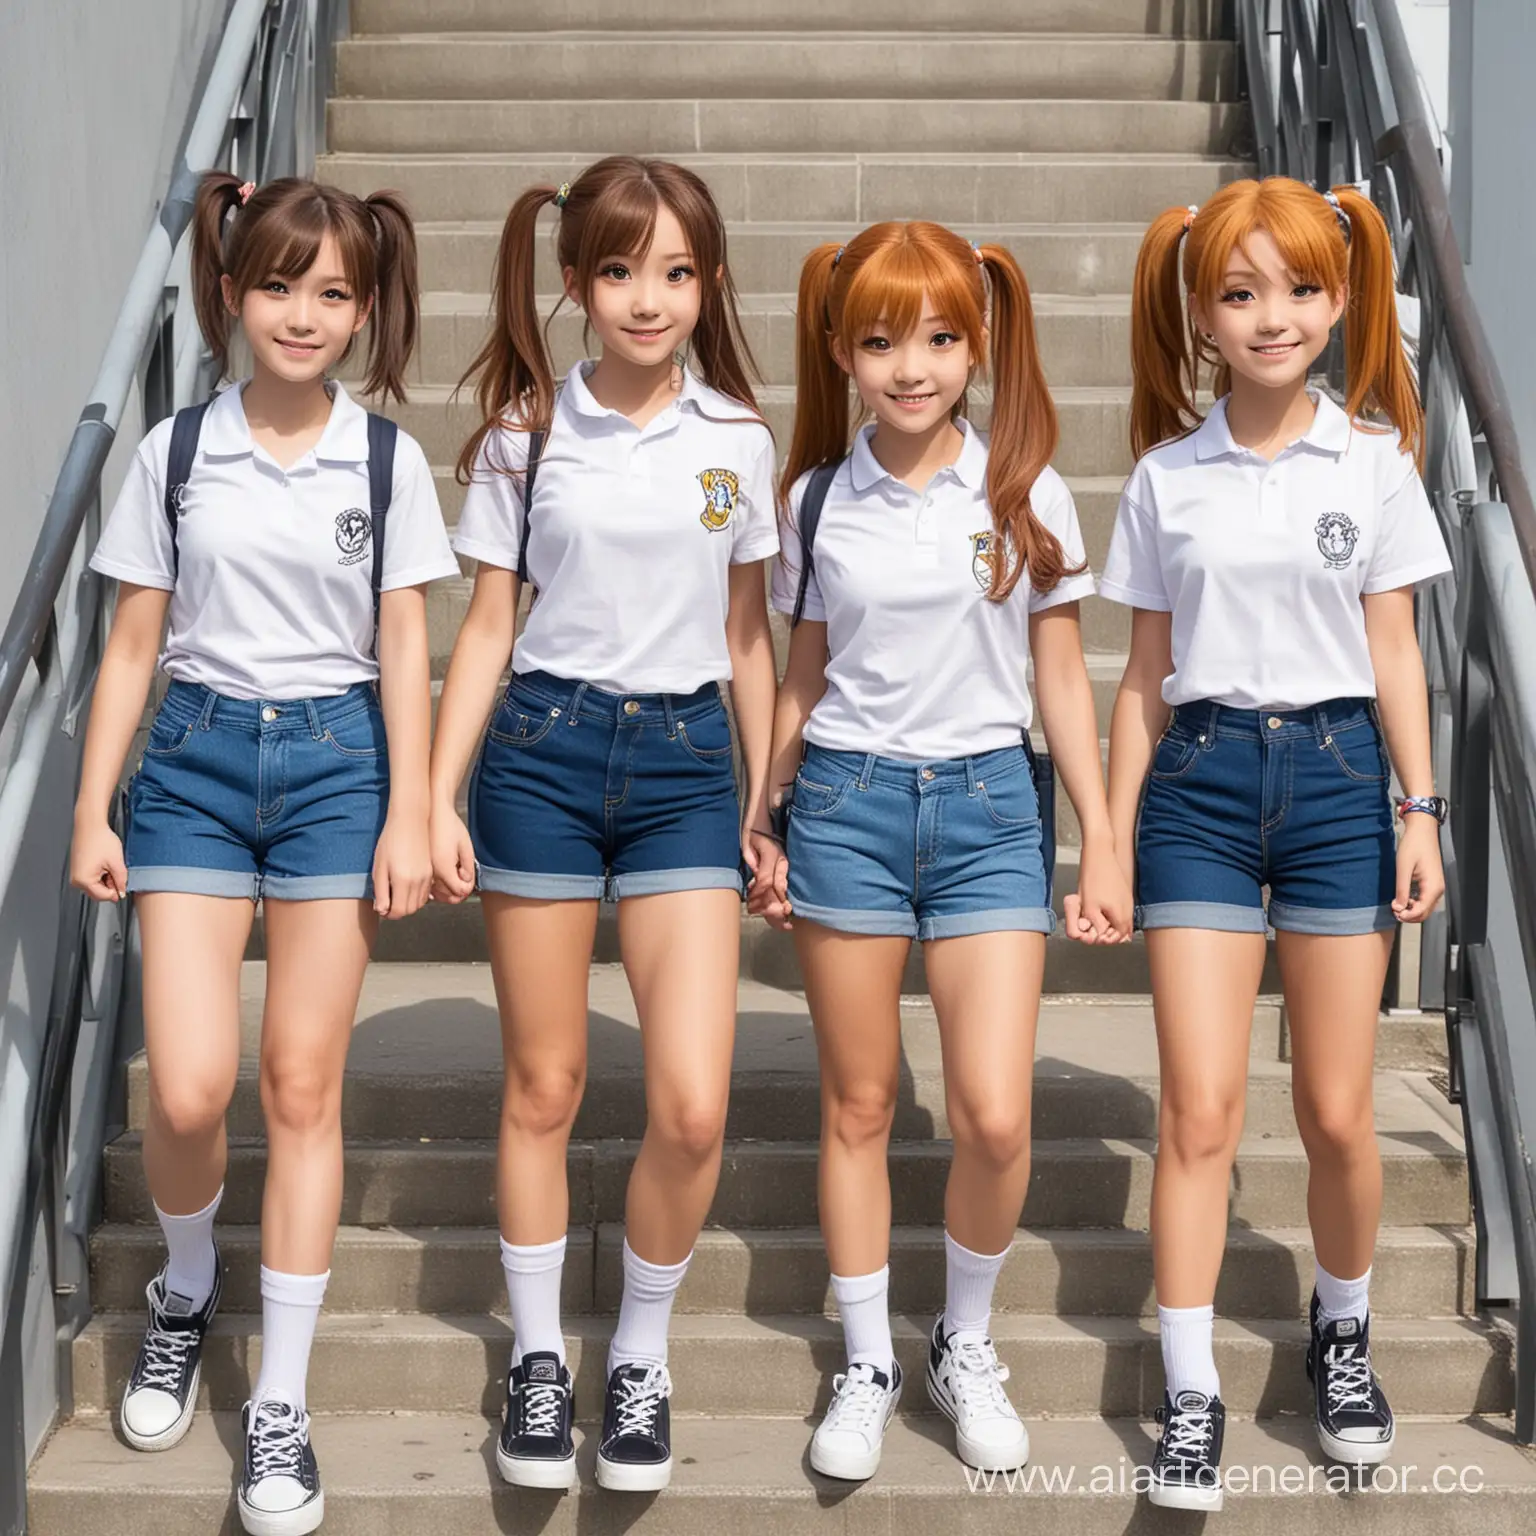 Diverse-Group-of-Schoolgirls-Descending-Stairs-in-Casual-and-Uniform-Attire